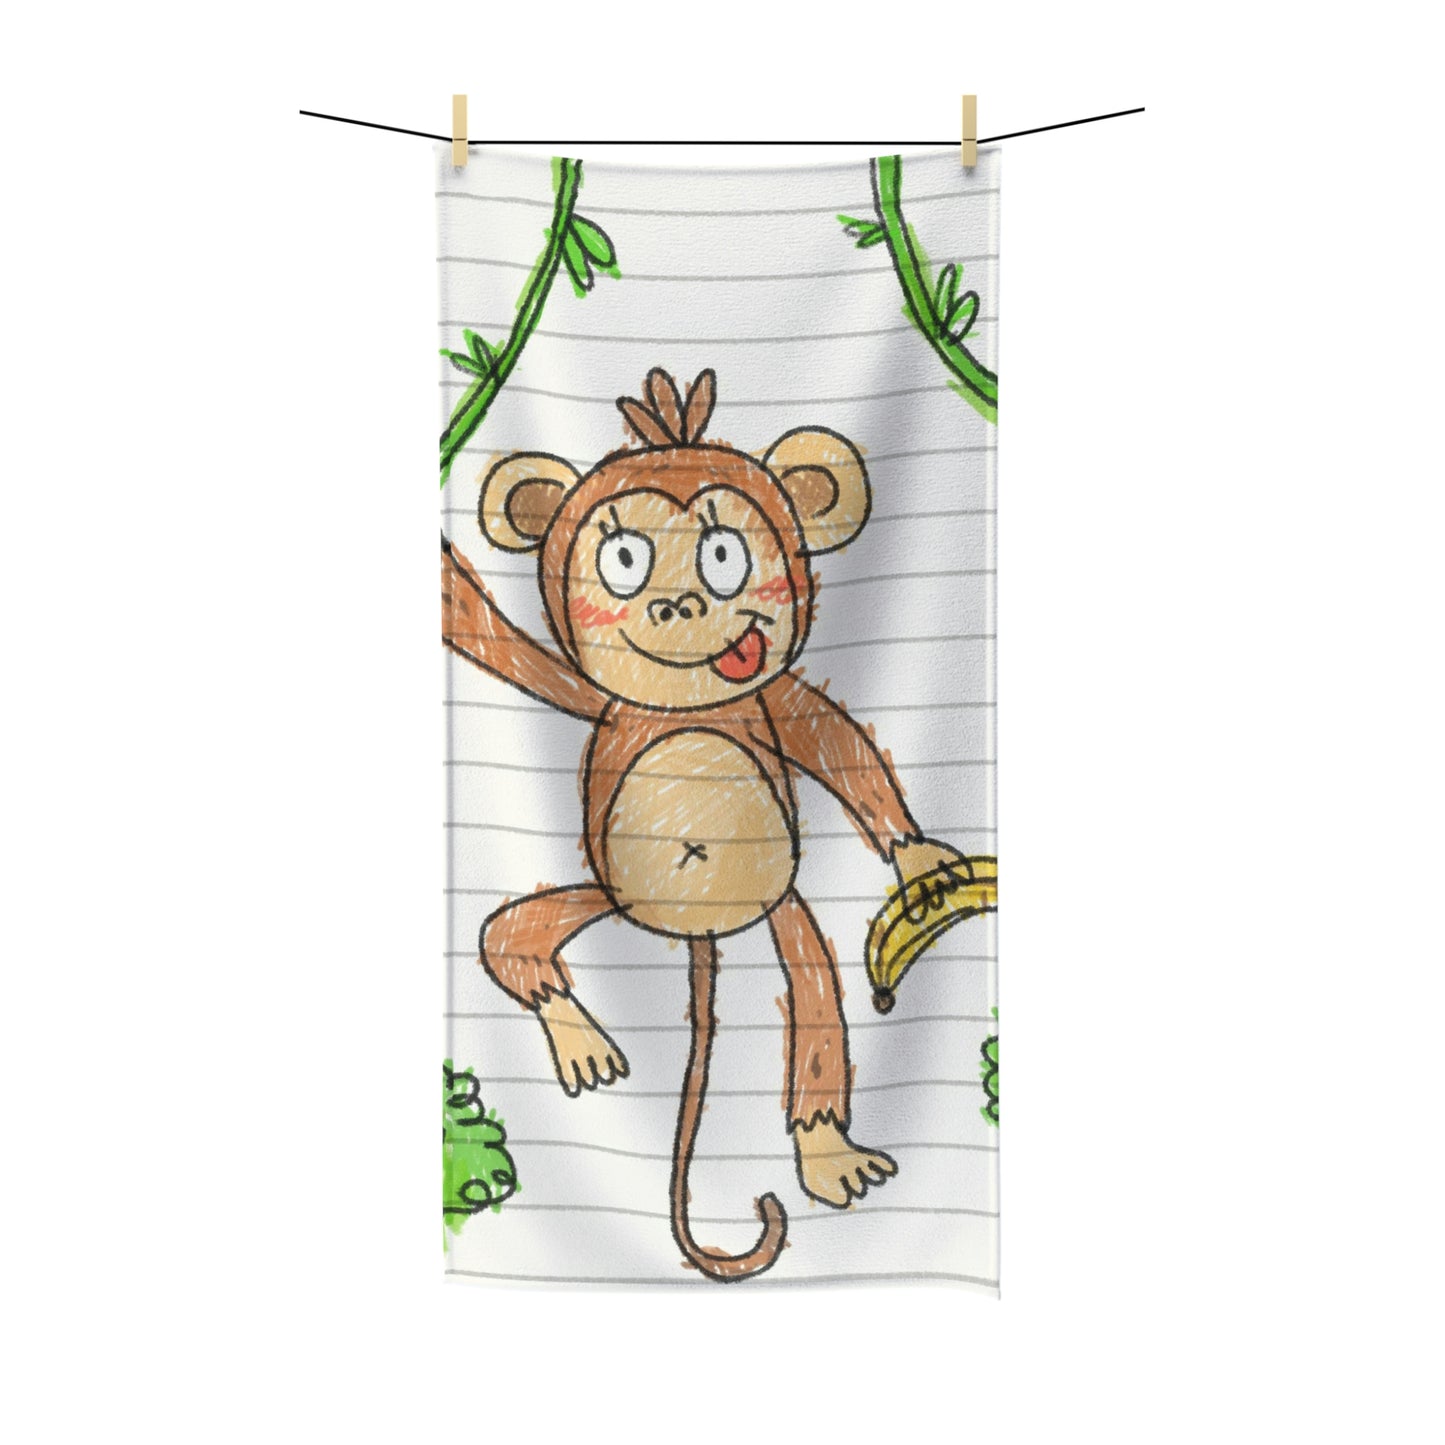 Graphic Monkey - Fun Zoo Clothing for Ape Lovers Polycotton Towel